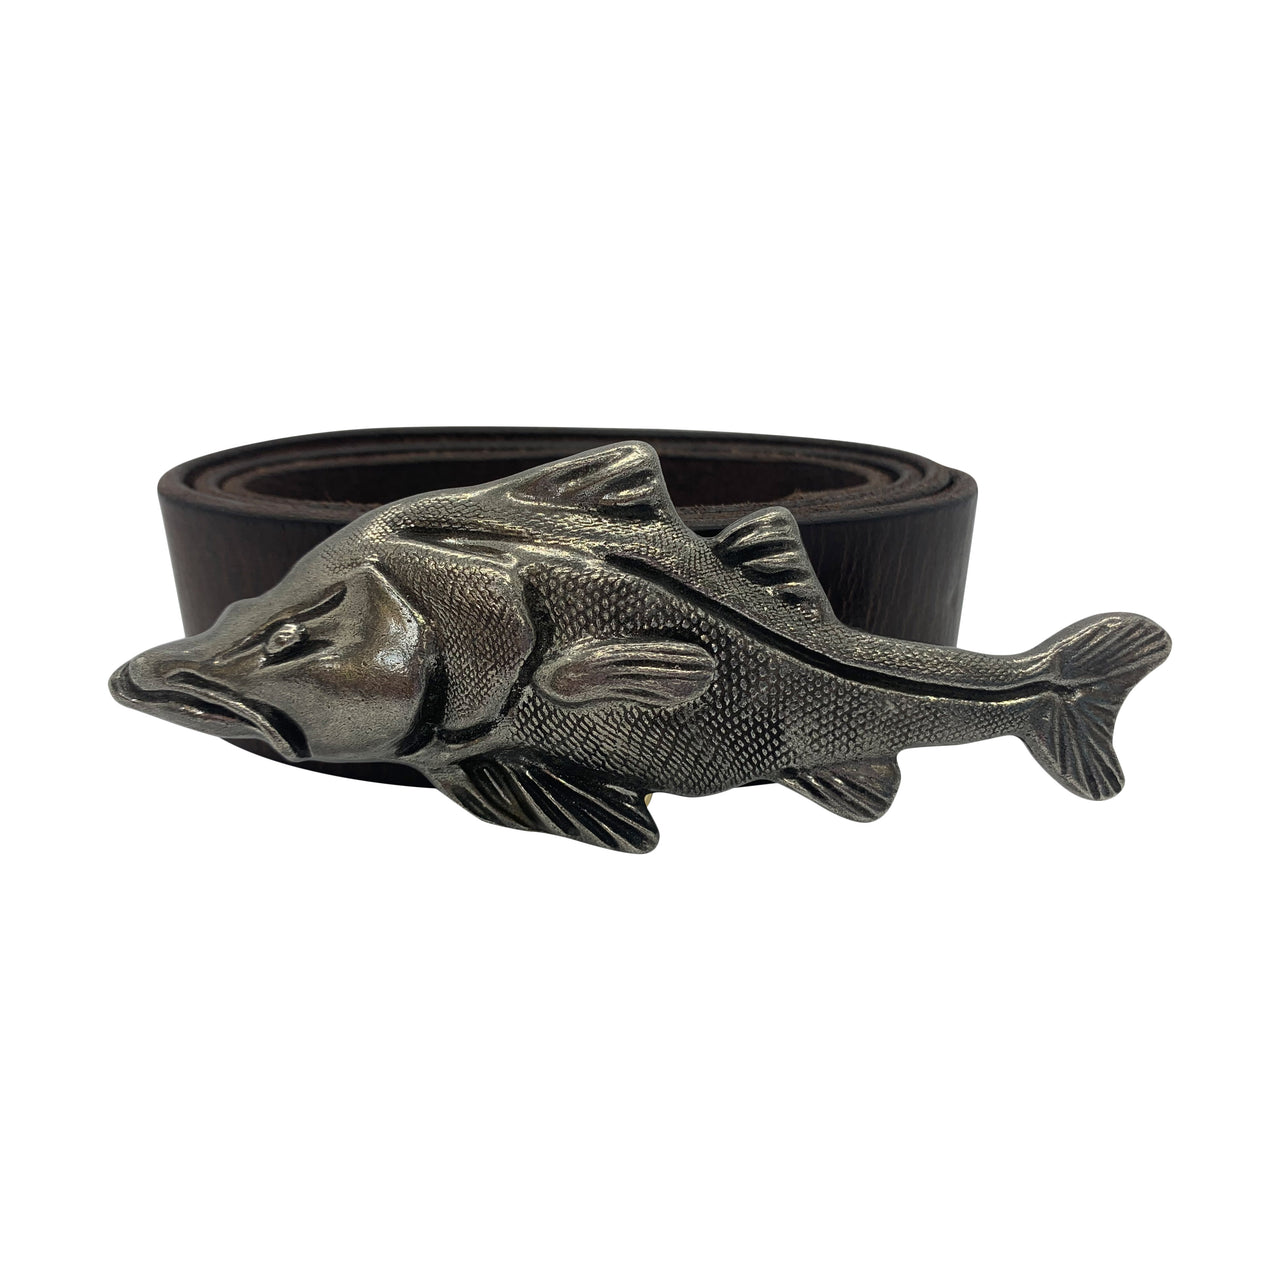 The Inshore Belt Buckle Collection